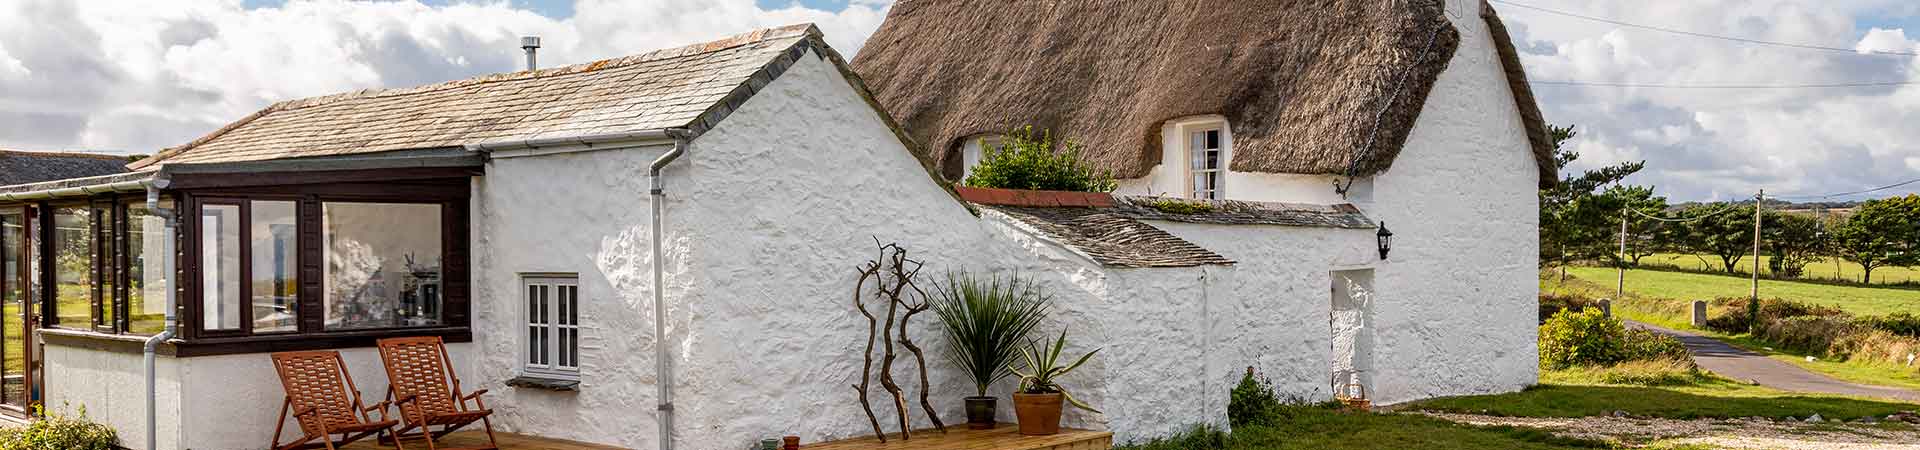 Thatched holiday cottages in South Cornwall